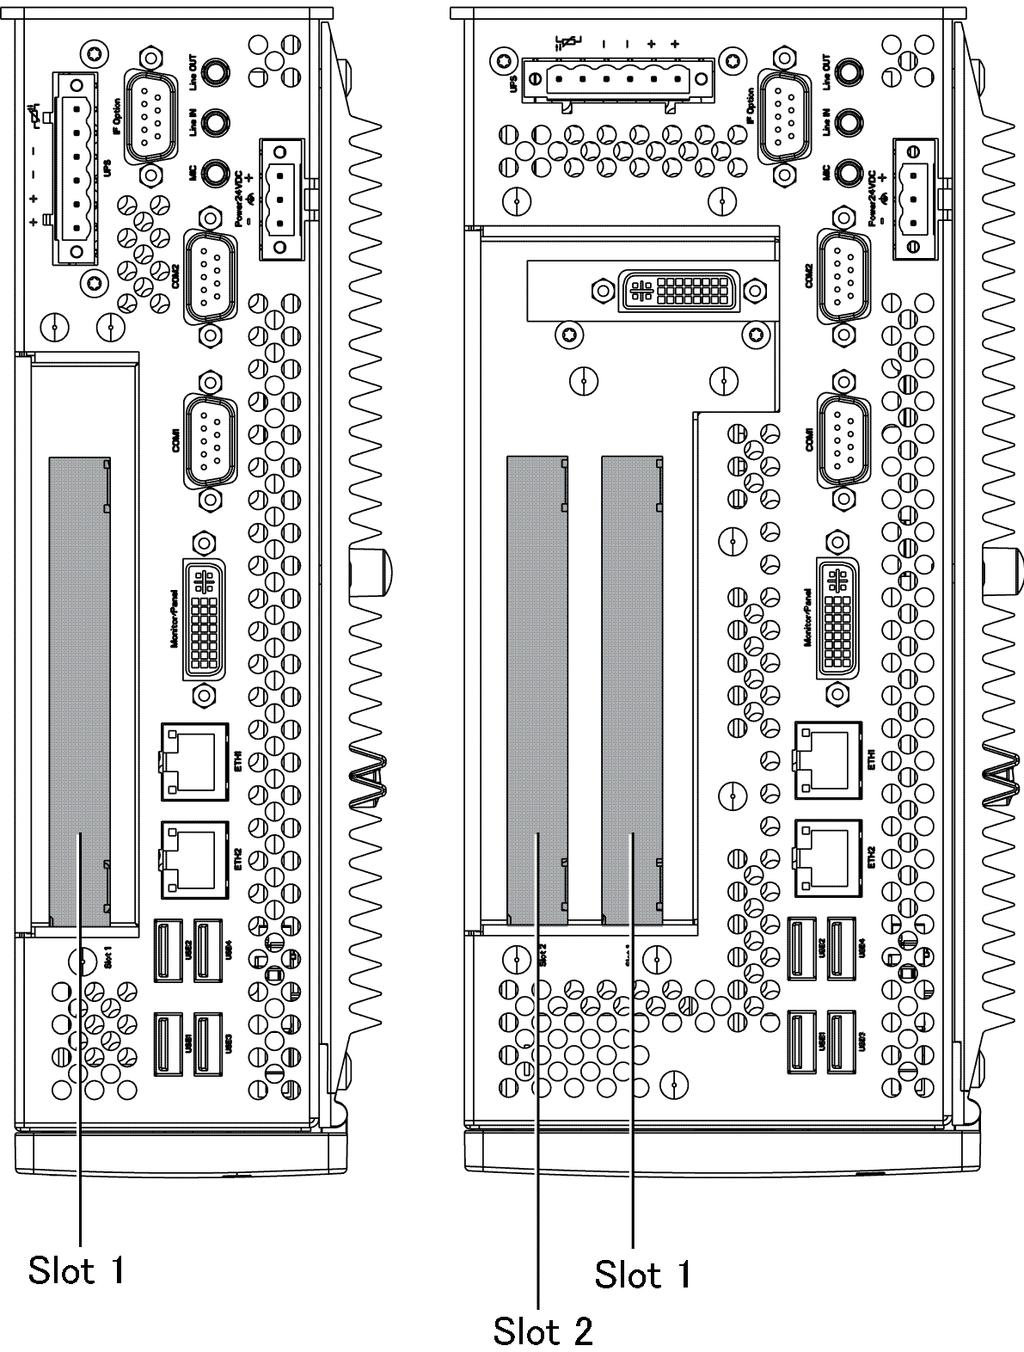 PS-4700/4800 Series (Atom N270 / Core 2 Duo P8400 Pre-installed Model) User Manual PCI Slot Position The following figure shows the PCI slot position: NOTE: Take into account the PCI/PCIe card type